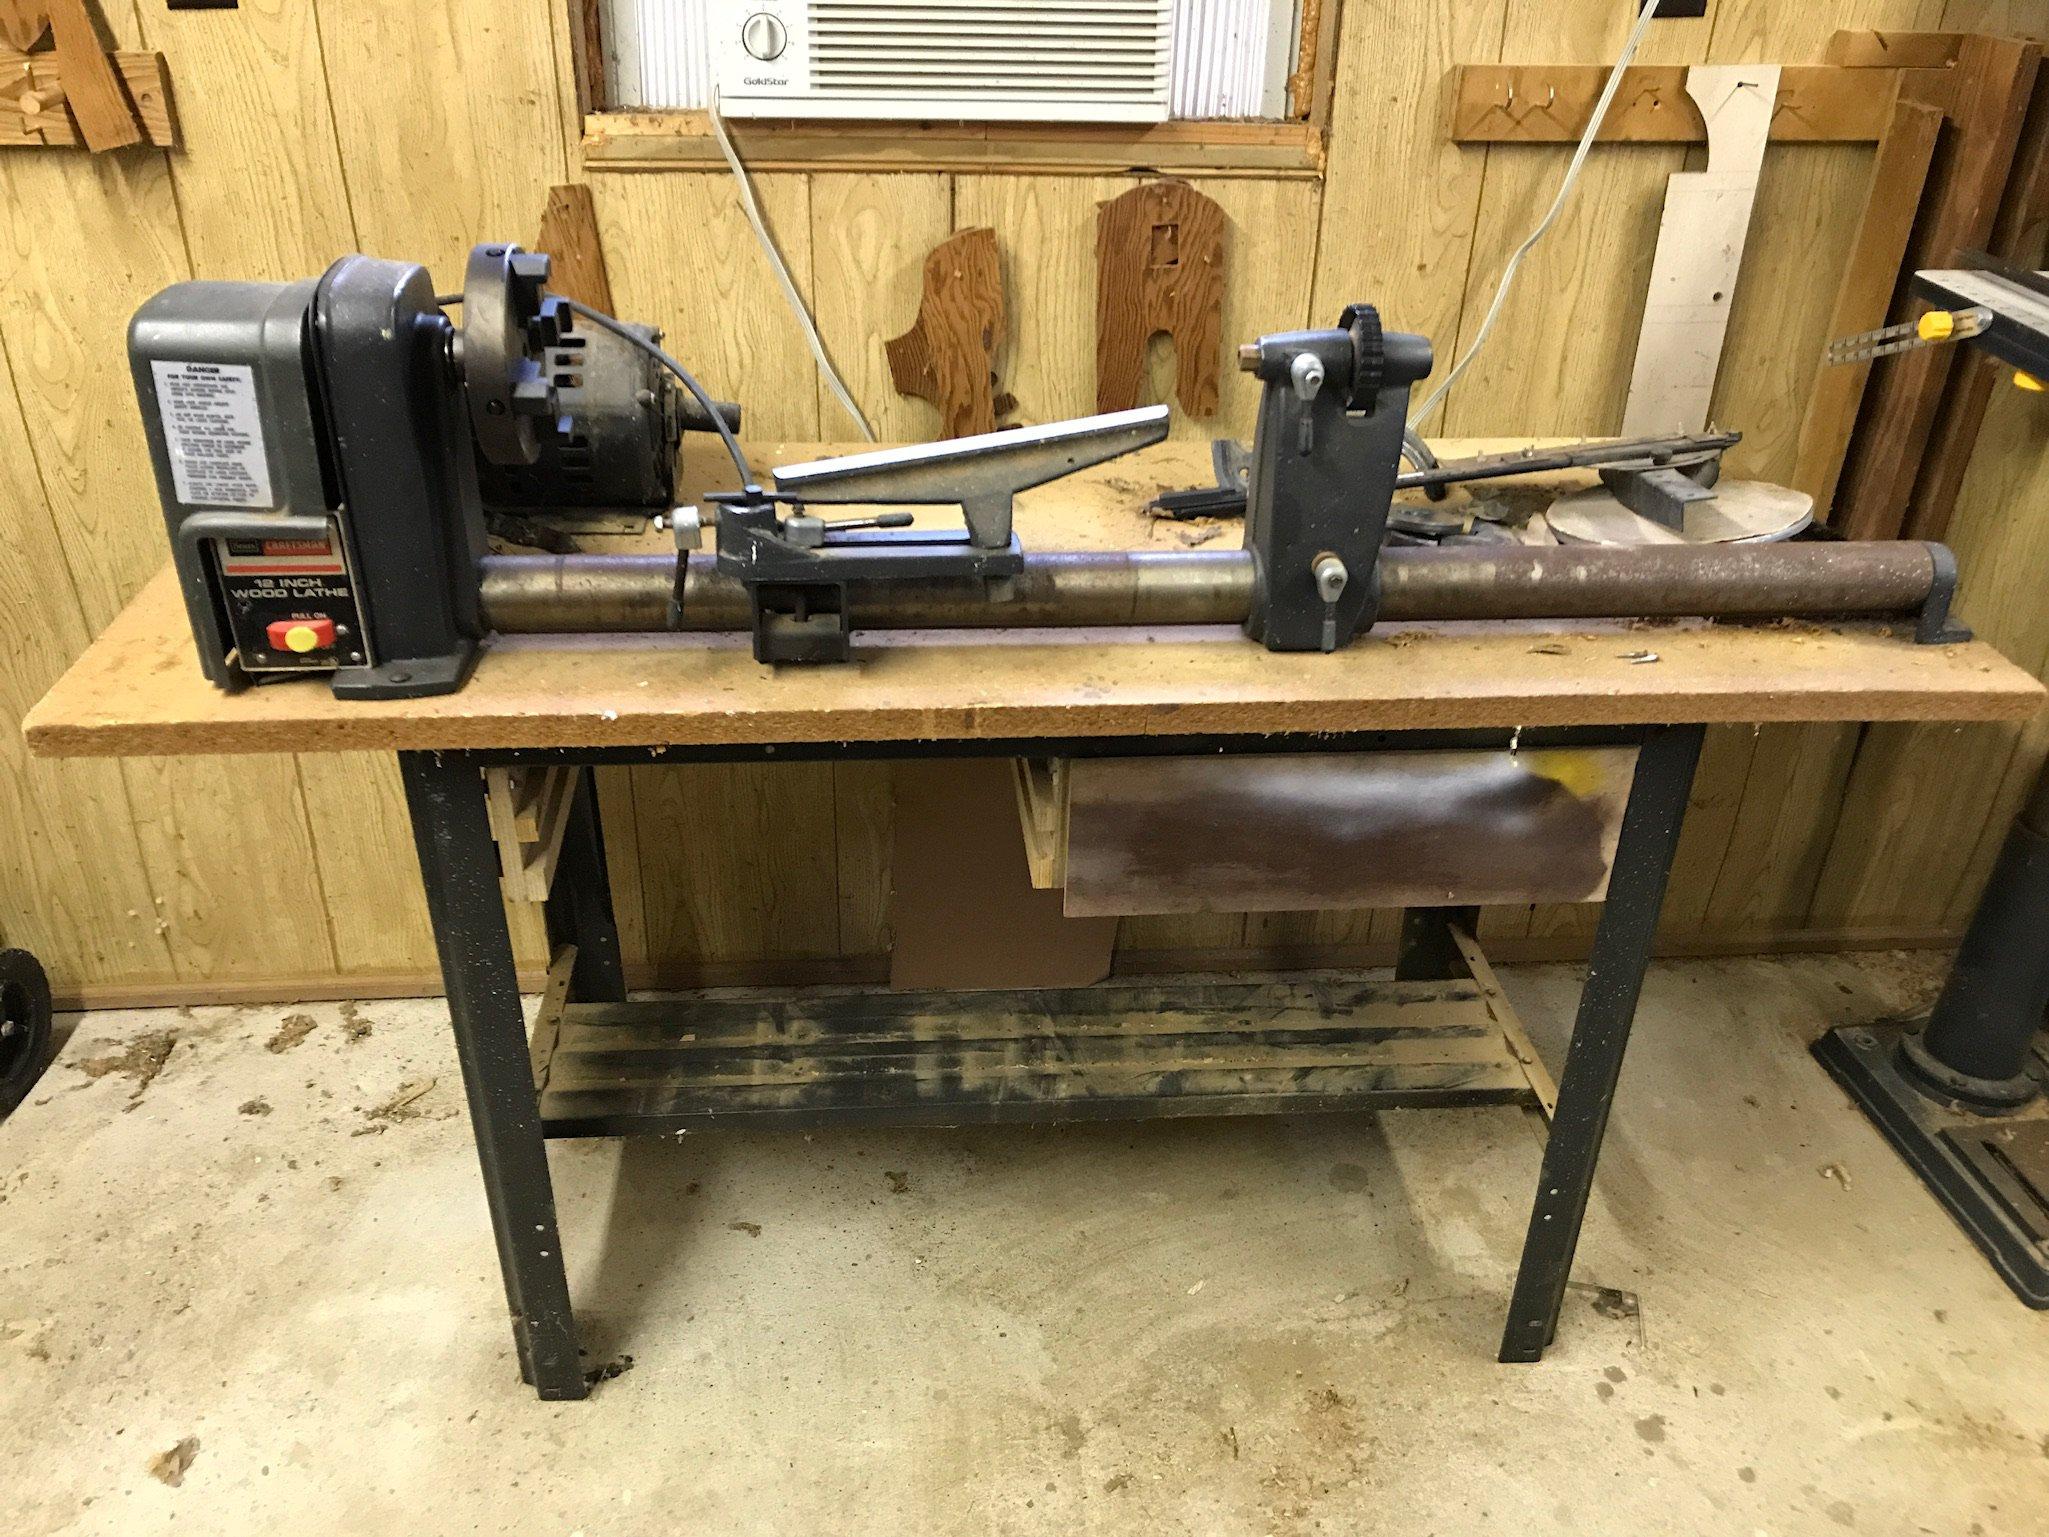 Sears Craftsman 12" Wood Lathe & Table with Drawers Full of Turning Tools - Model 113.23801